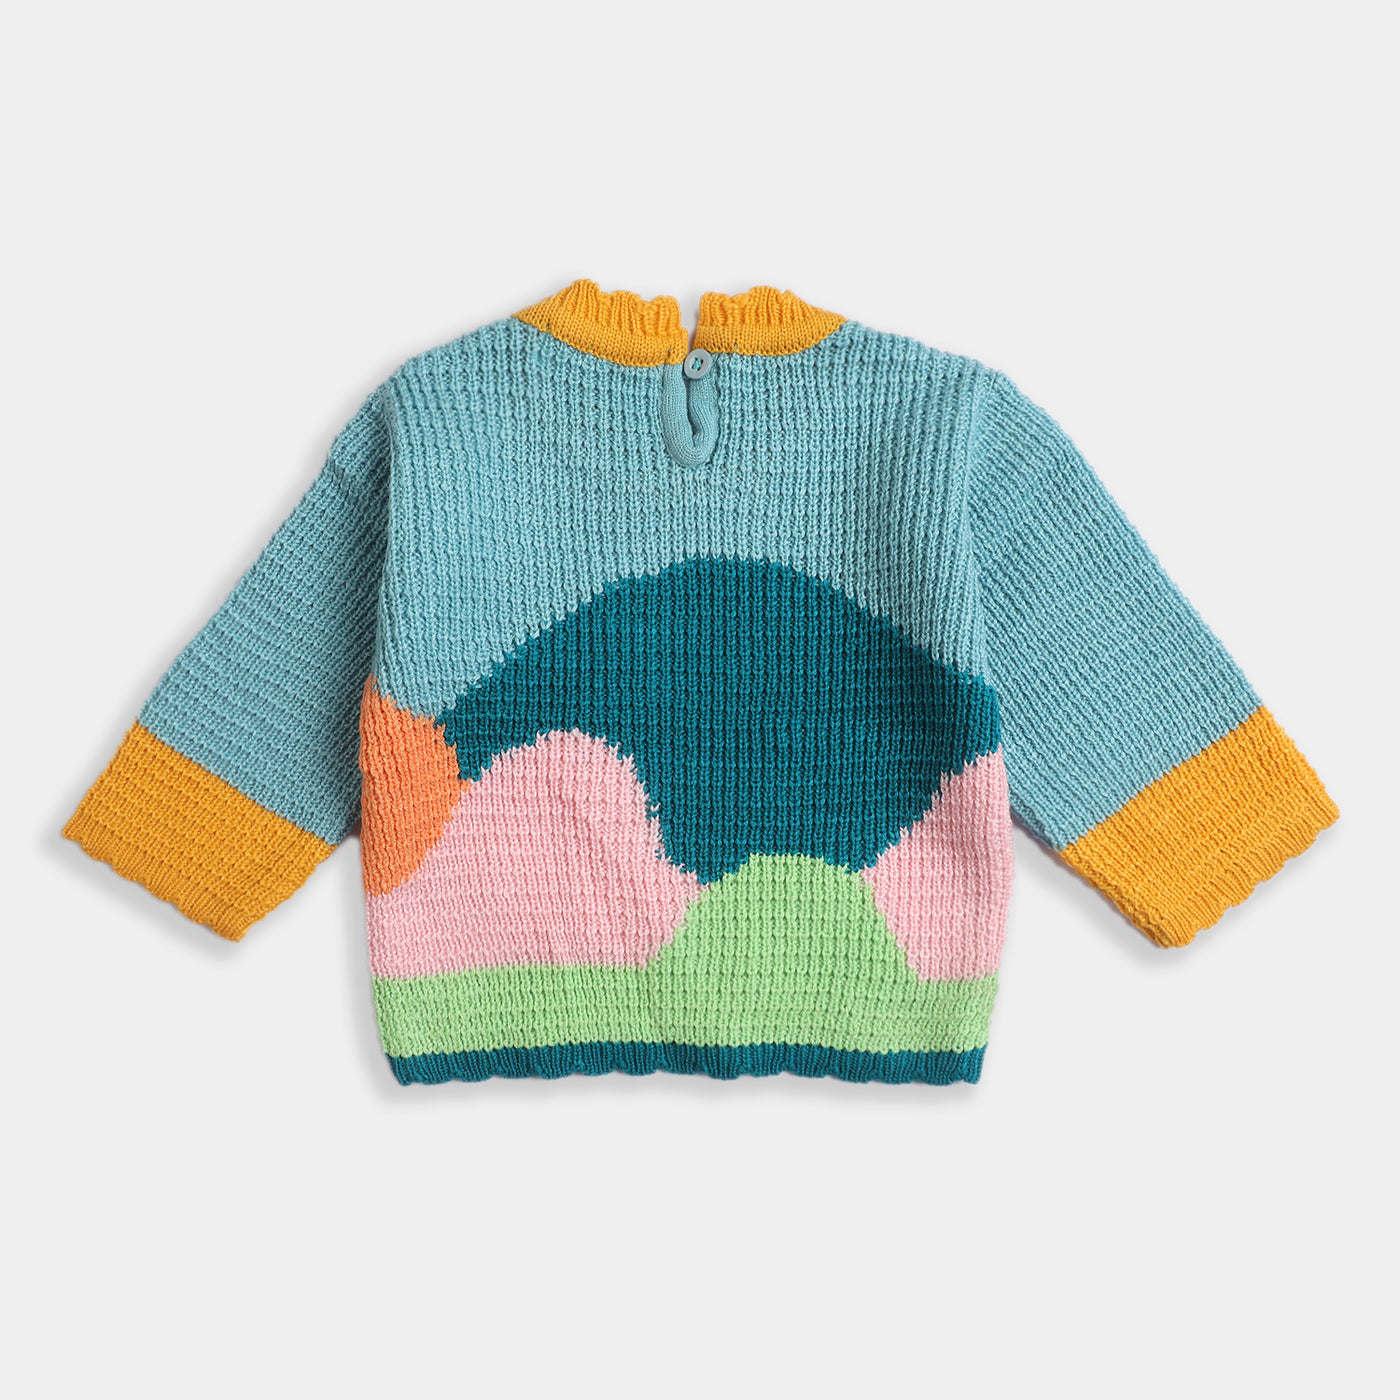 Infant Girls Knitted Sweater -Multi